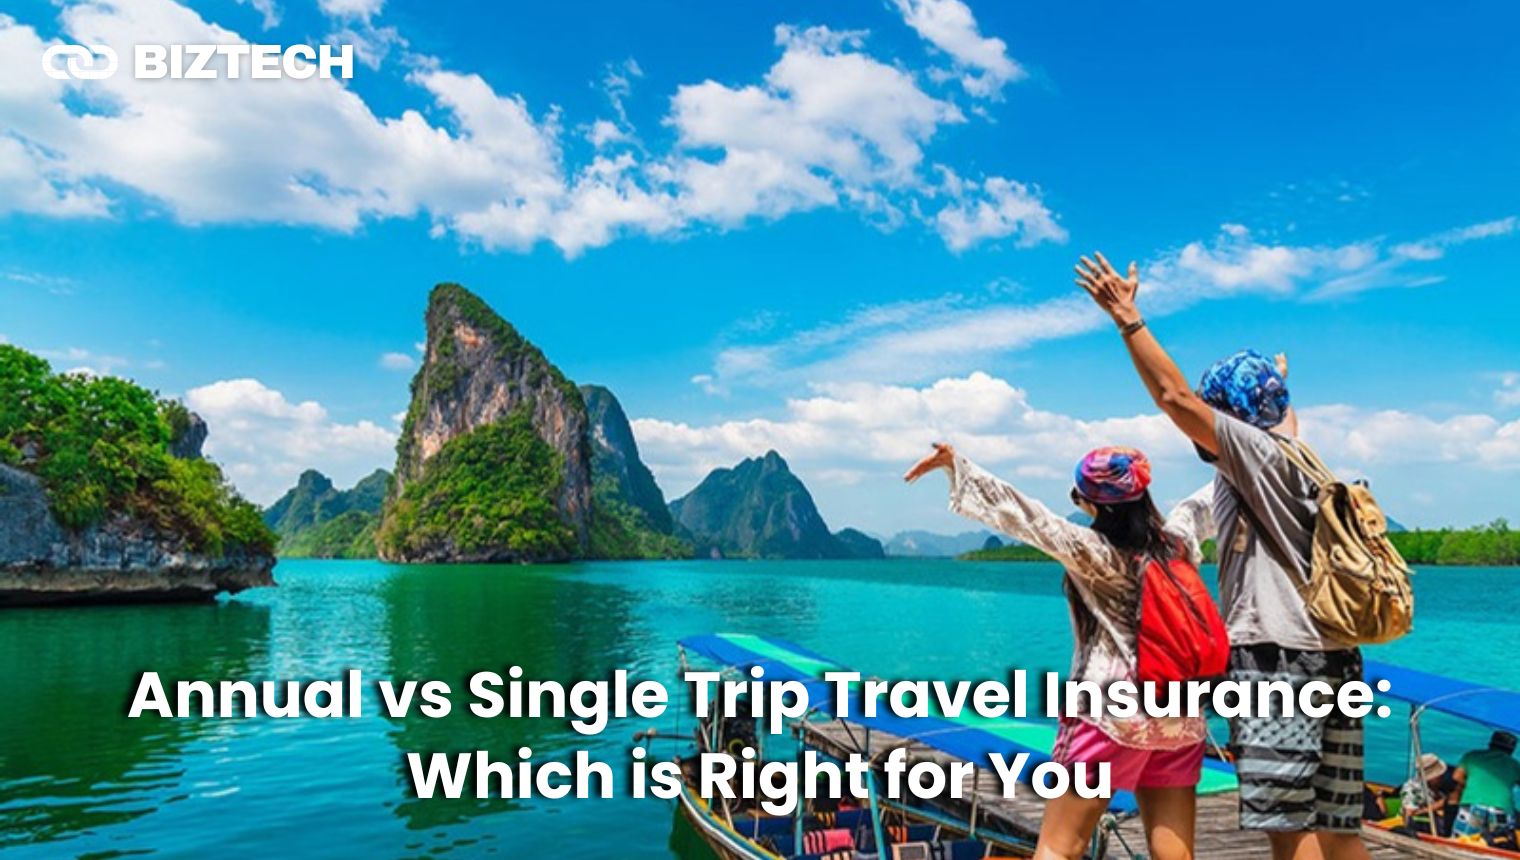 Annual vs Single Trip Travel Insurance: Which is Right for You?